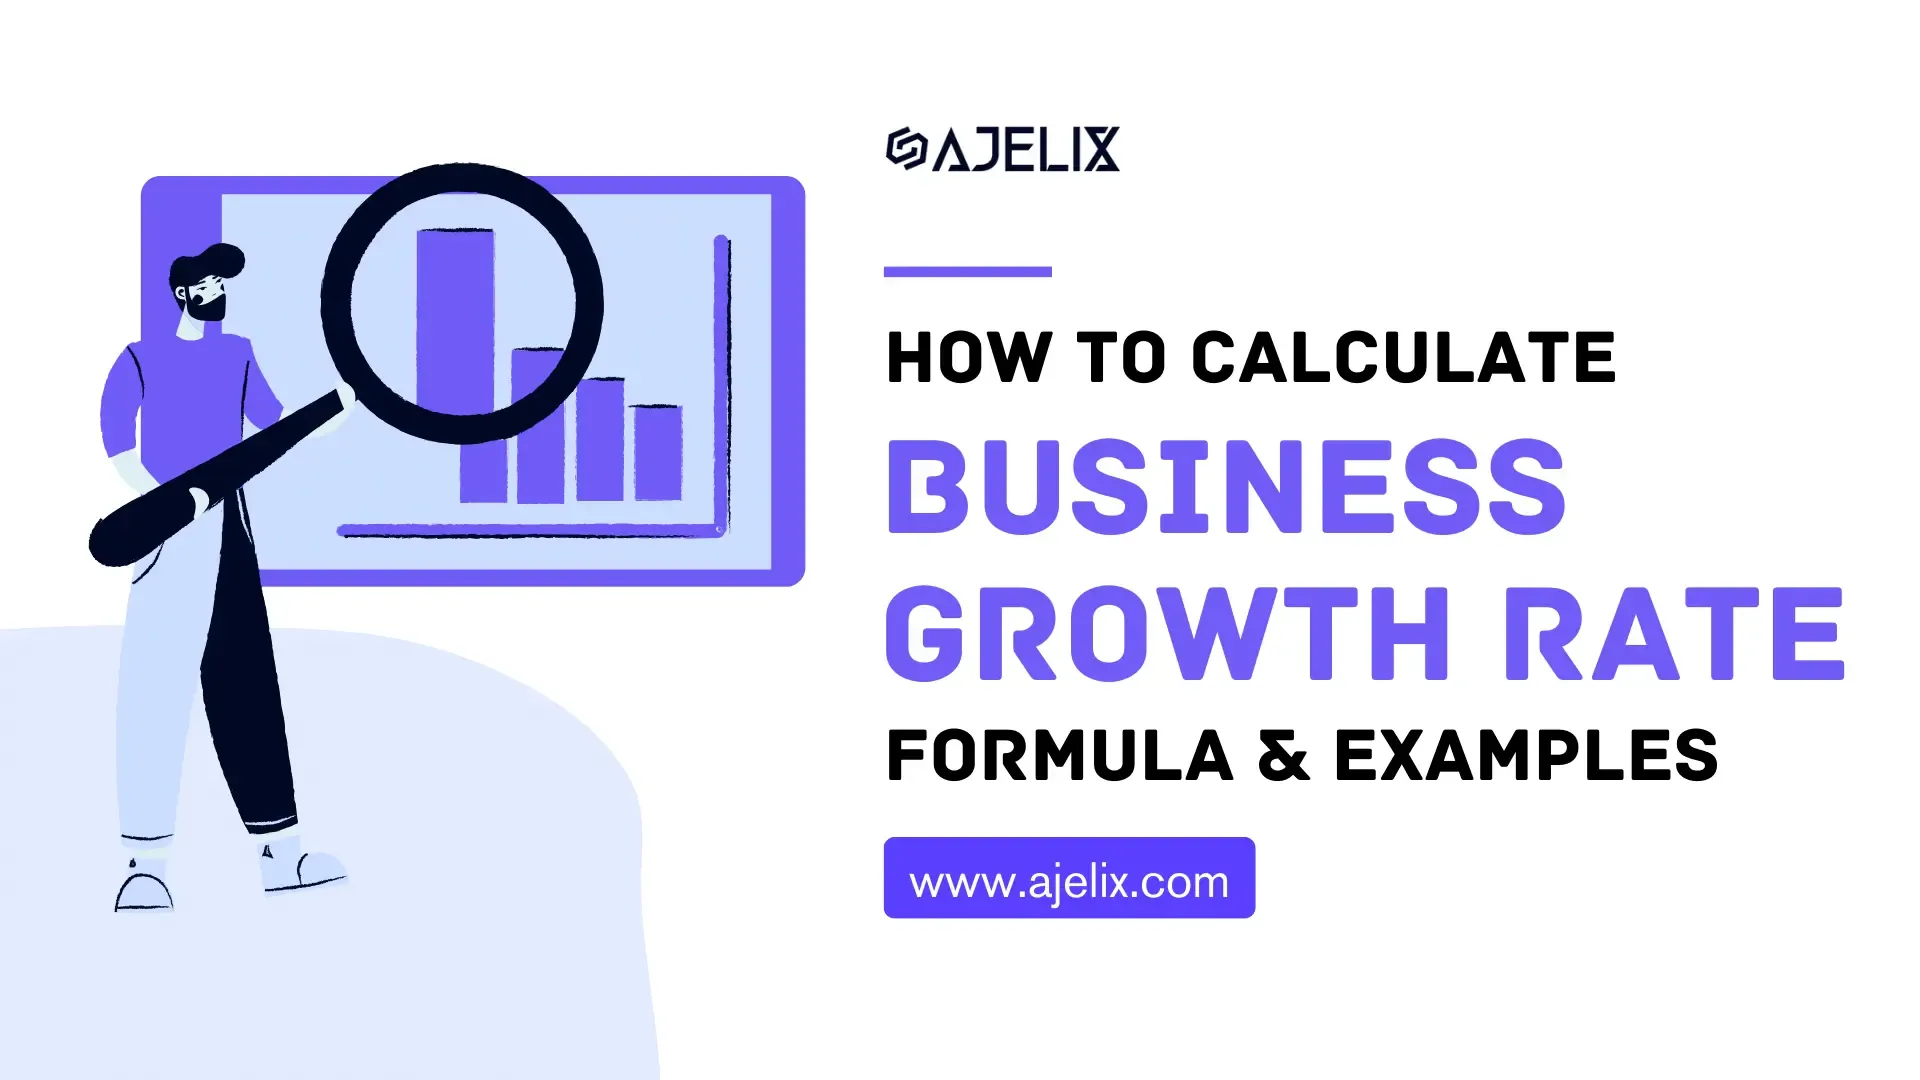 Hoe to calculate business growth rate with examples and formula banner by ajelix